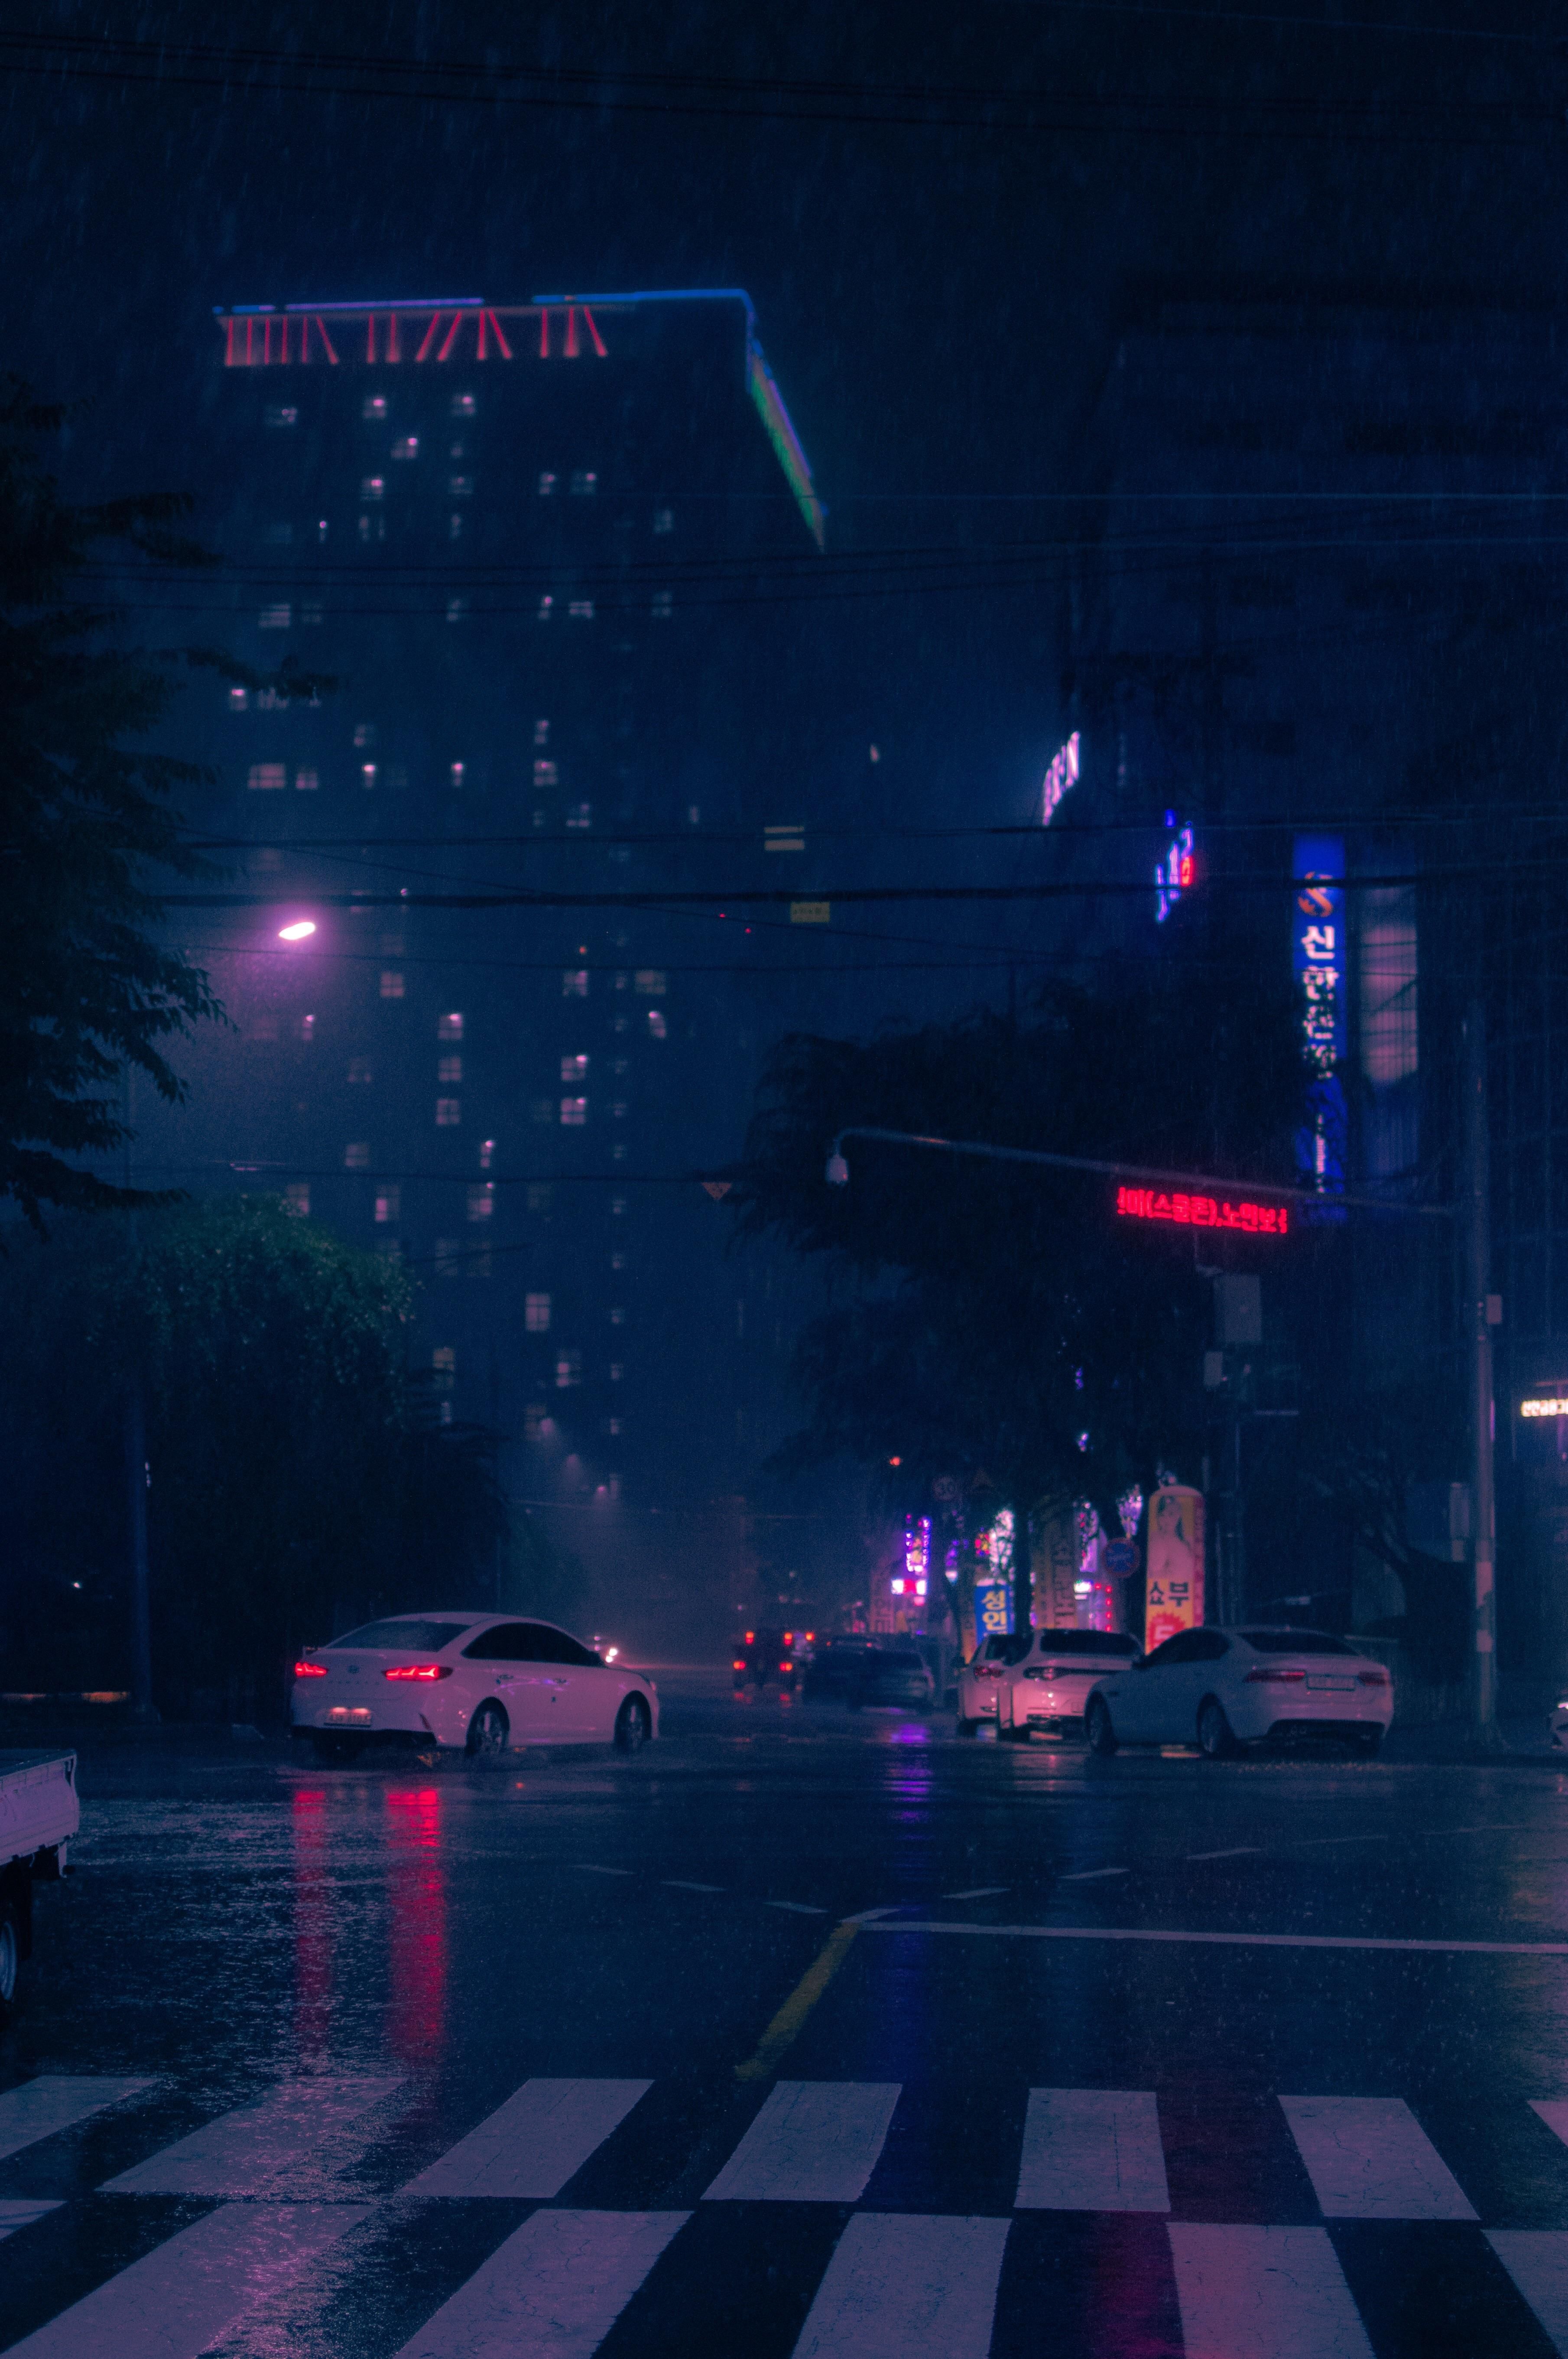 Outrun Subreddits Curated By U Inkorp. Dark City, Aesthetic Background, Anime Scenery Wallpaper